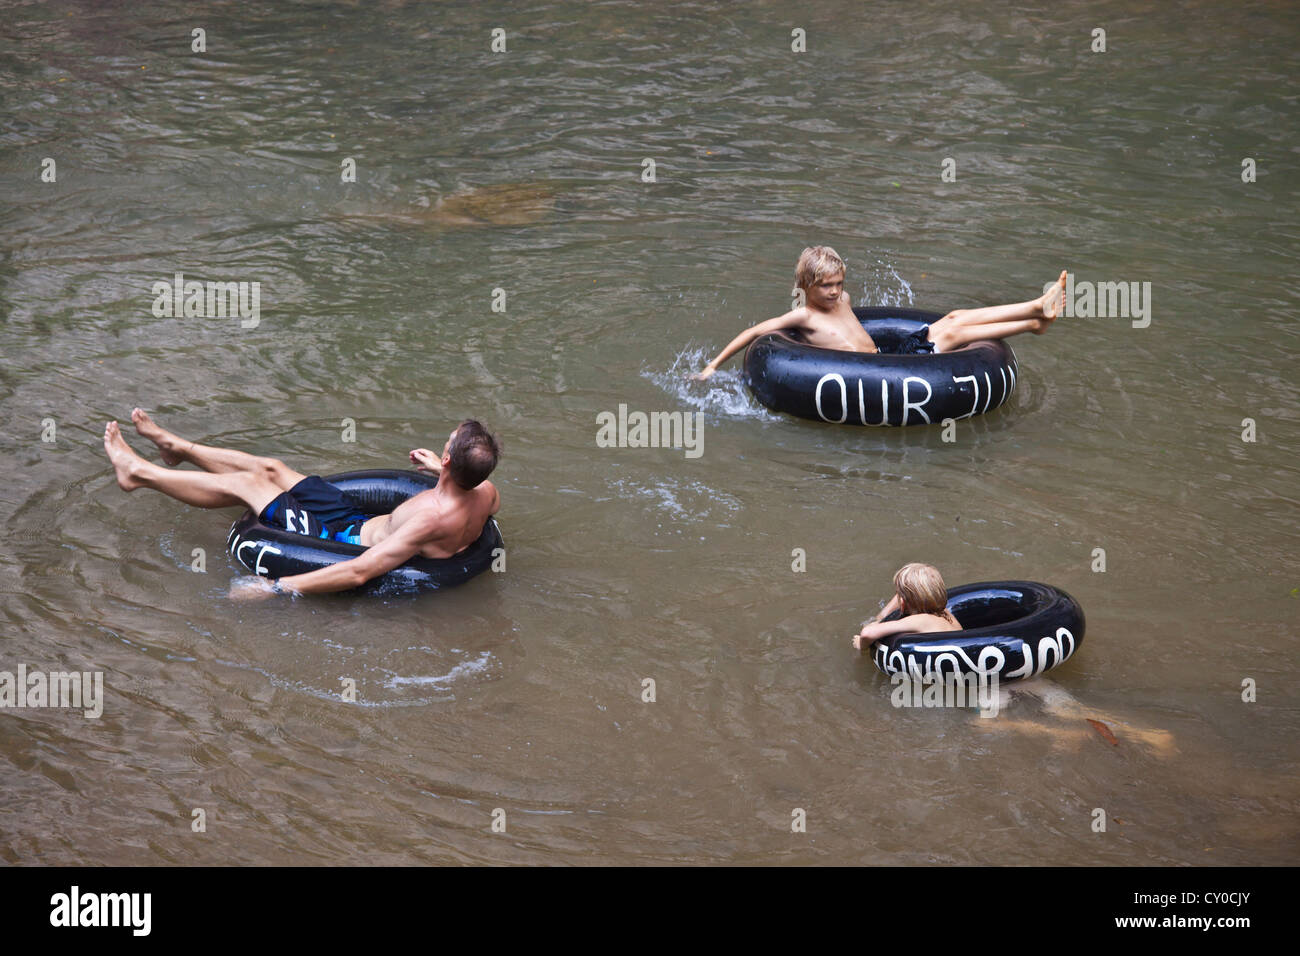 Tubing in the river next to OUR JUNGLE HOUSE a lodge near KHAO SOK NATIONAL PARK - SURATHANI PROVENCE, THAILAND Stock Photo